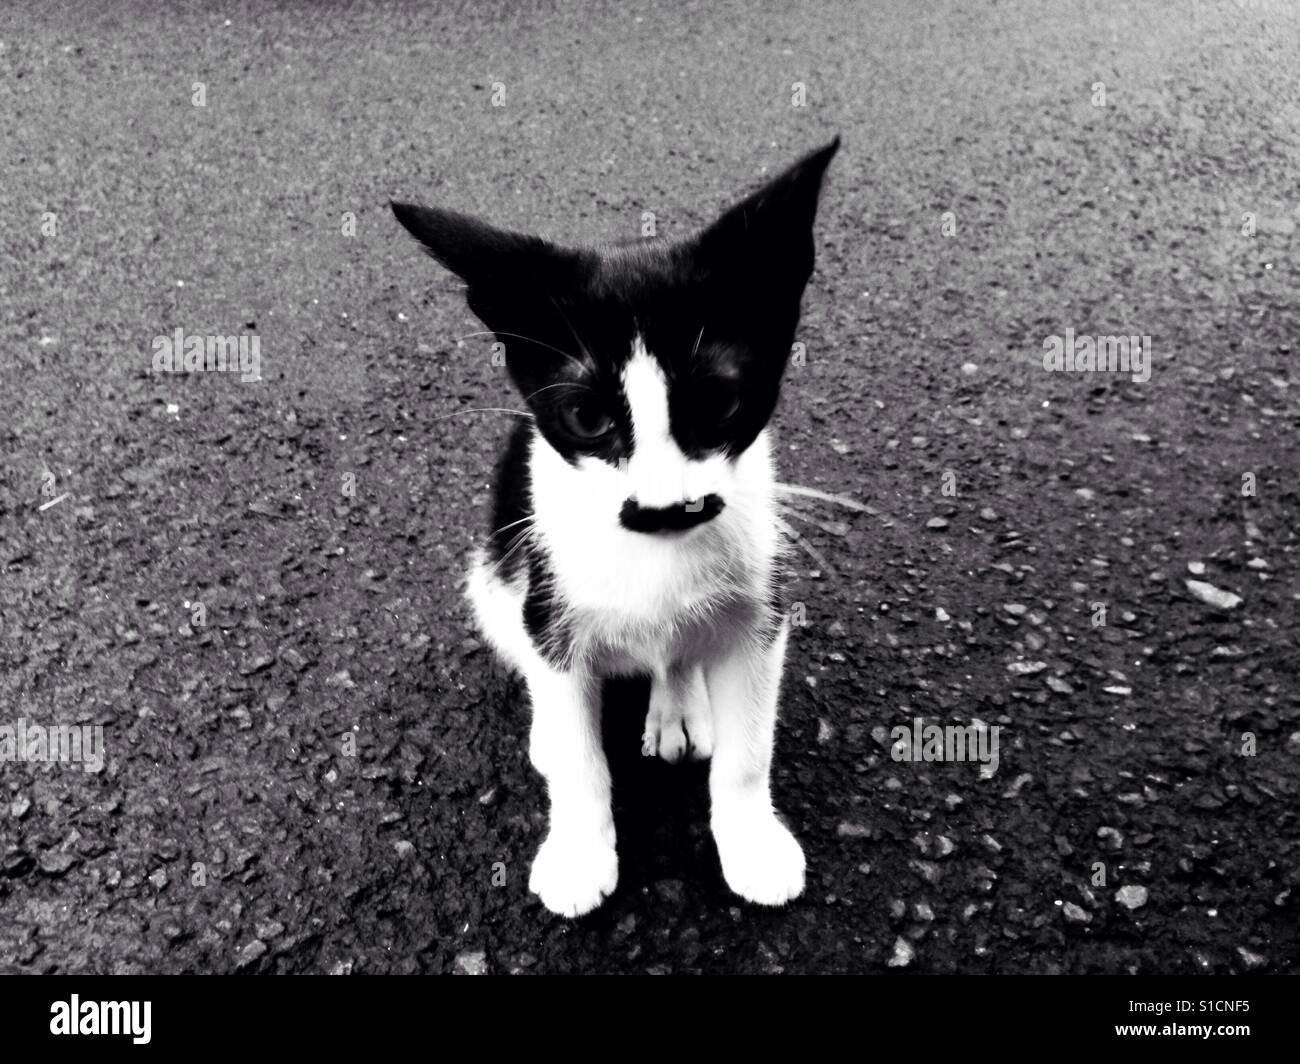 Poor Little Street Cat - Black and White Stock Photo